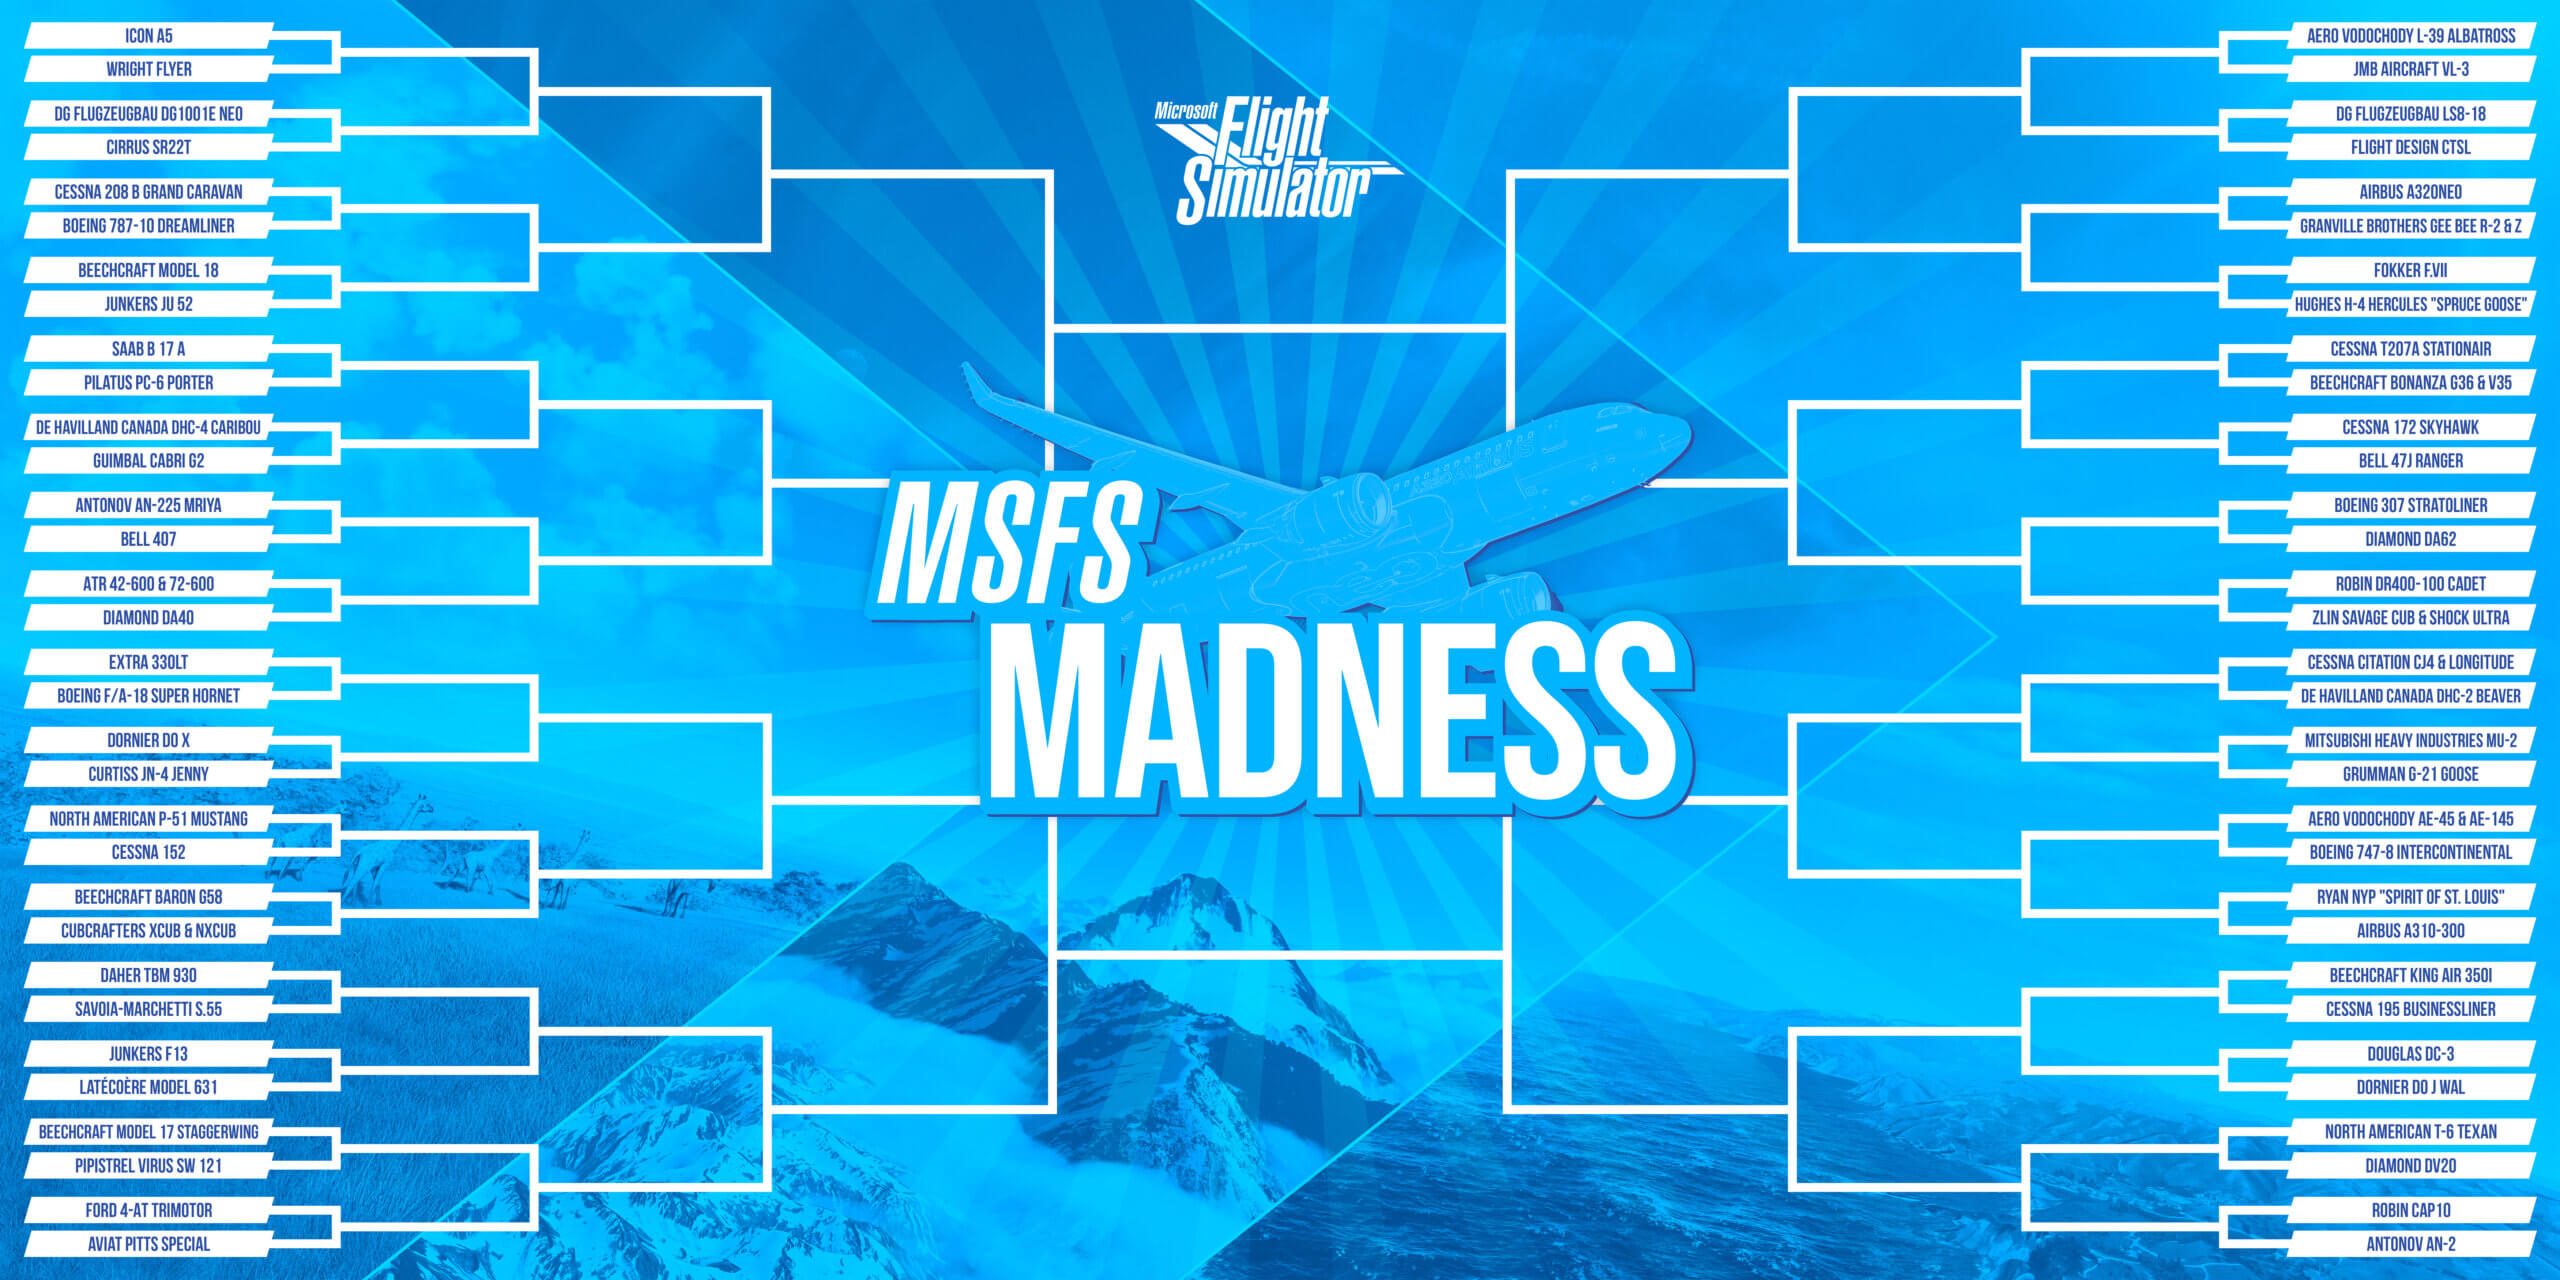 A tournament bracket with 64 different aircraft from Microsoft Flight Simulator